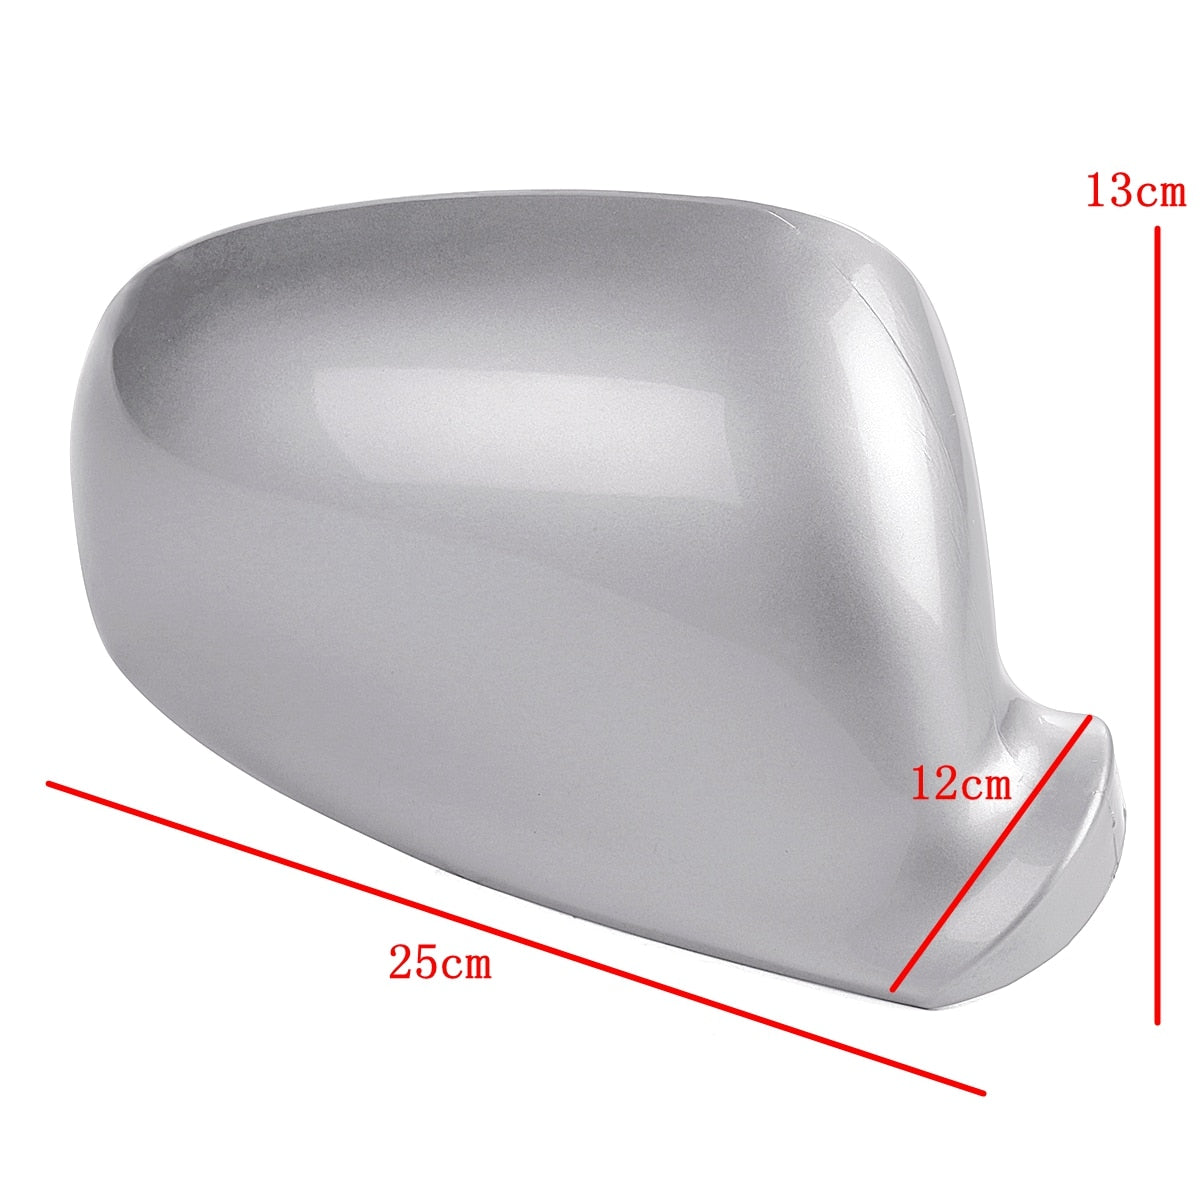 (RIGHT) Rearview Side Wing Mirror Cover Silver Suit For VW Golf Jetta MK5 2003 - 2009